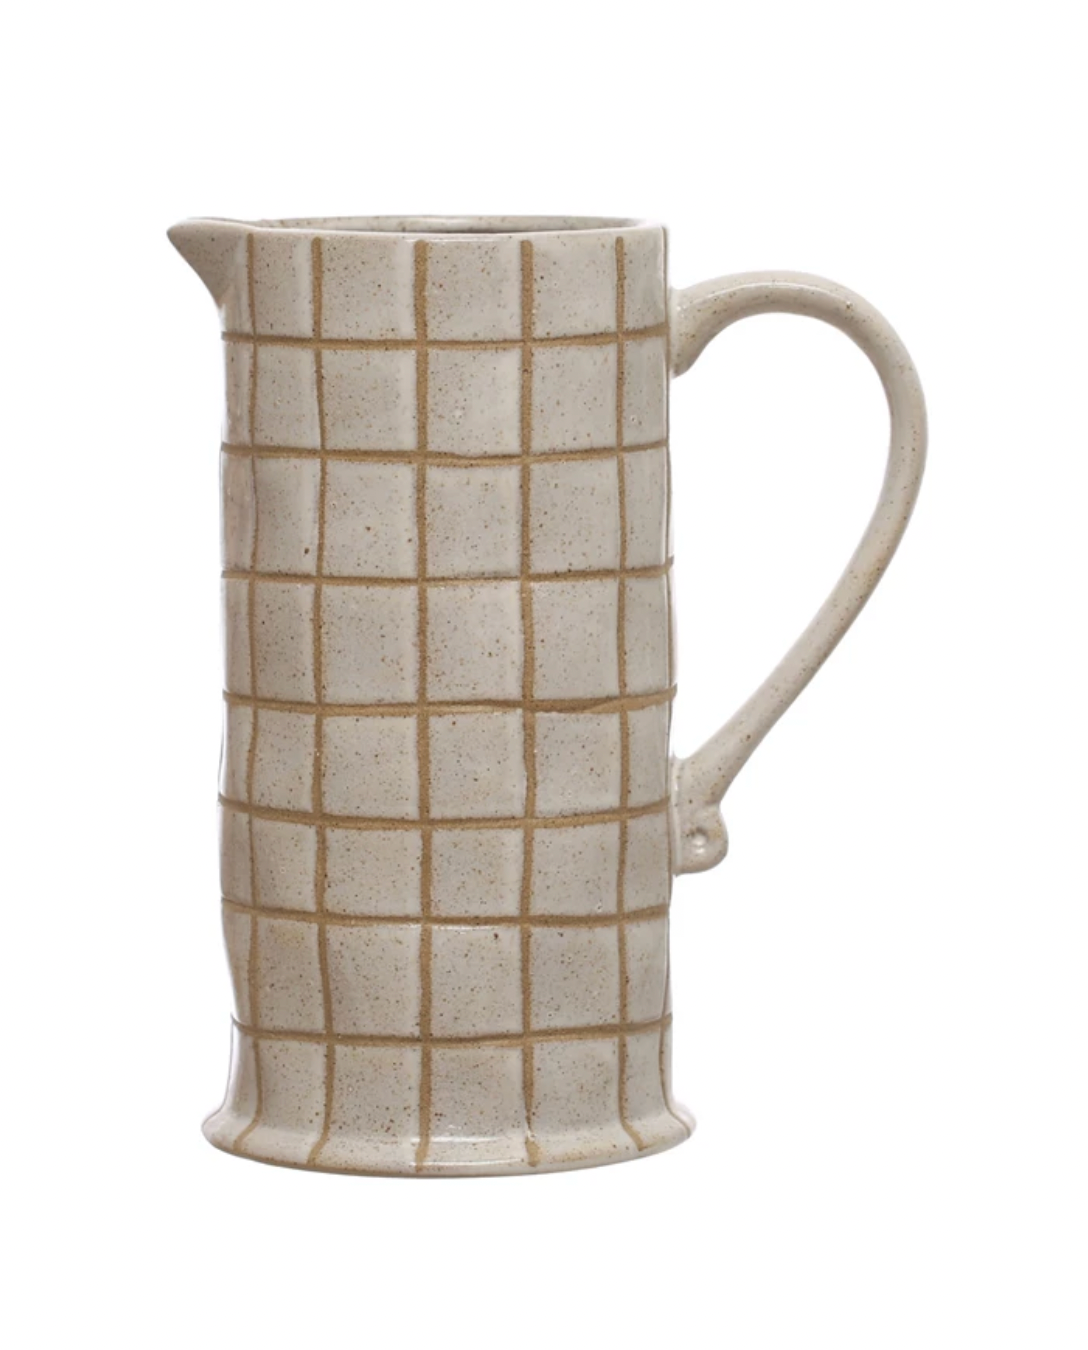 Checked Pattern Pitcher